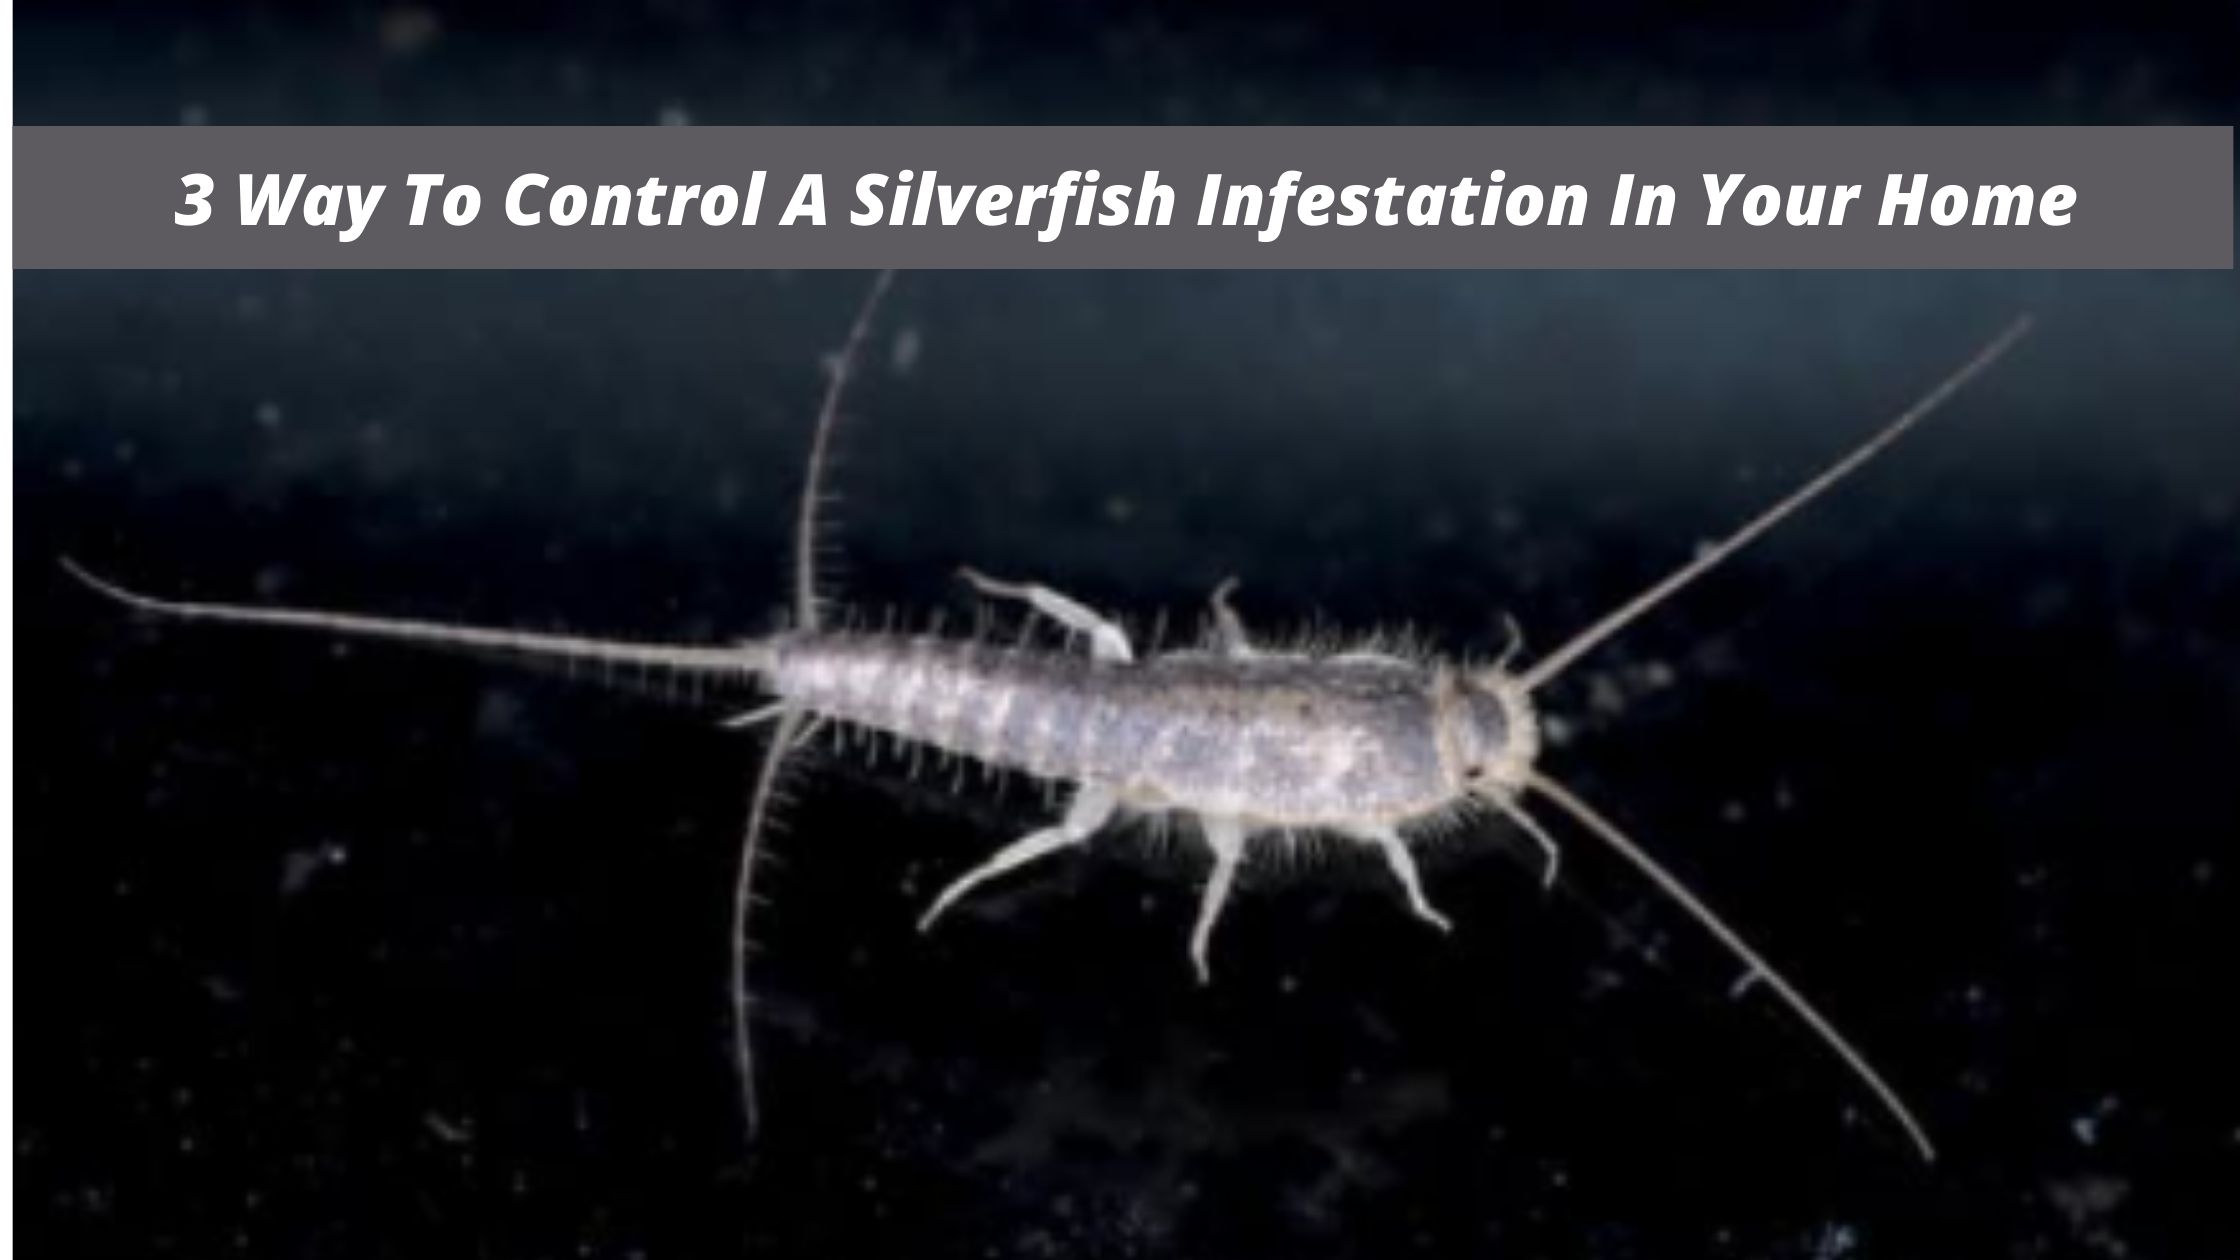 3 Way To Control A Silverfish Infestation In Your Home